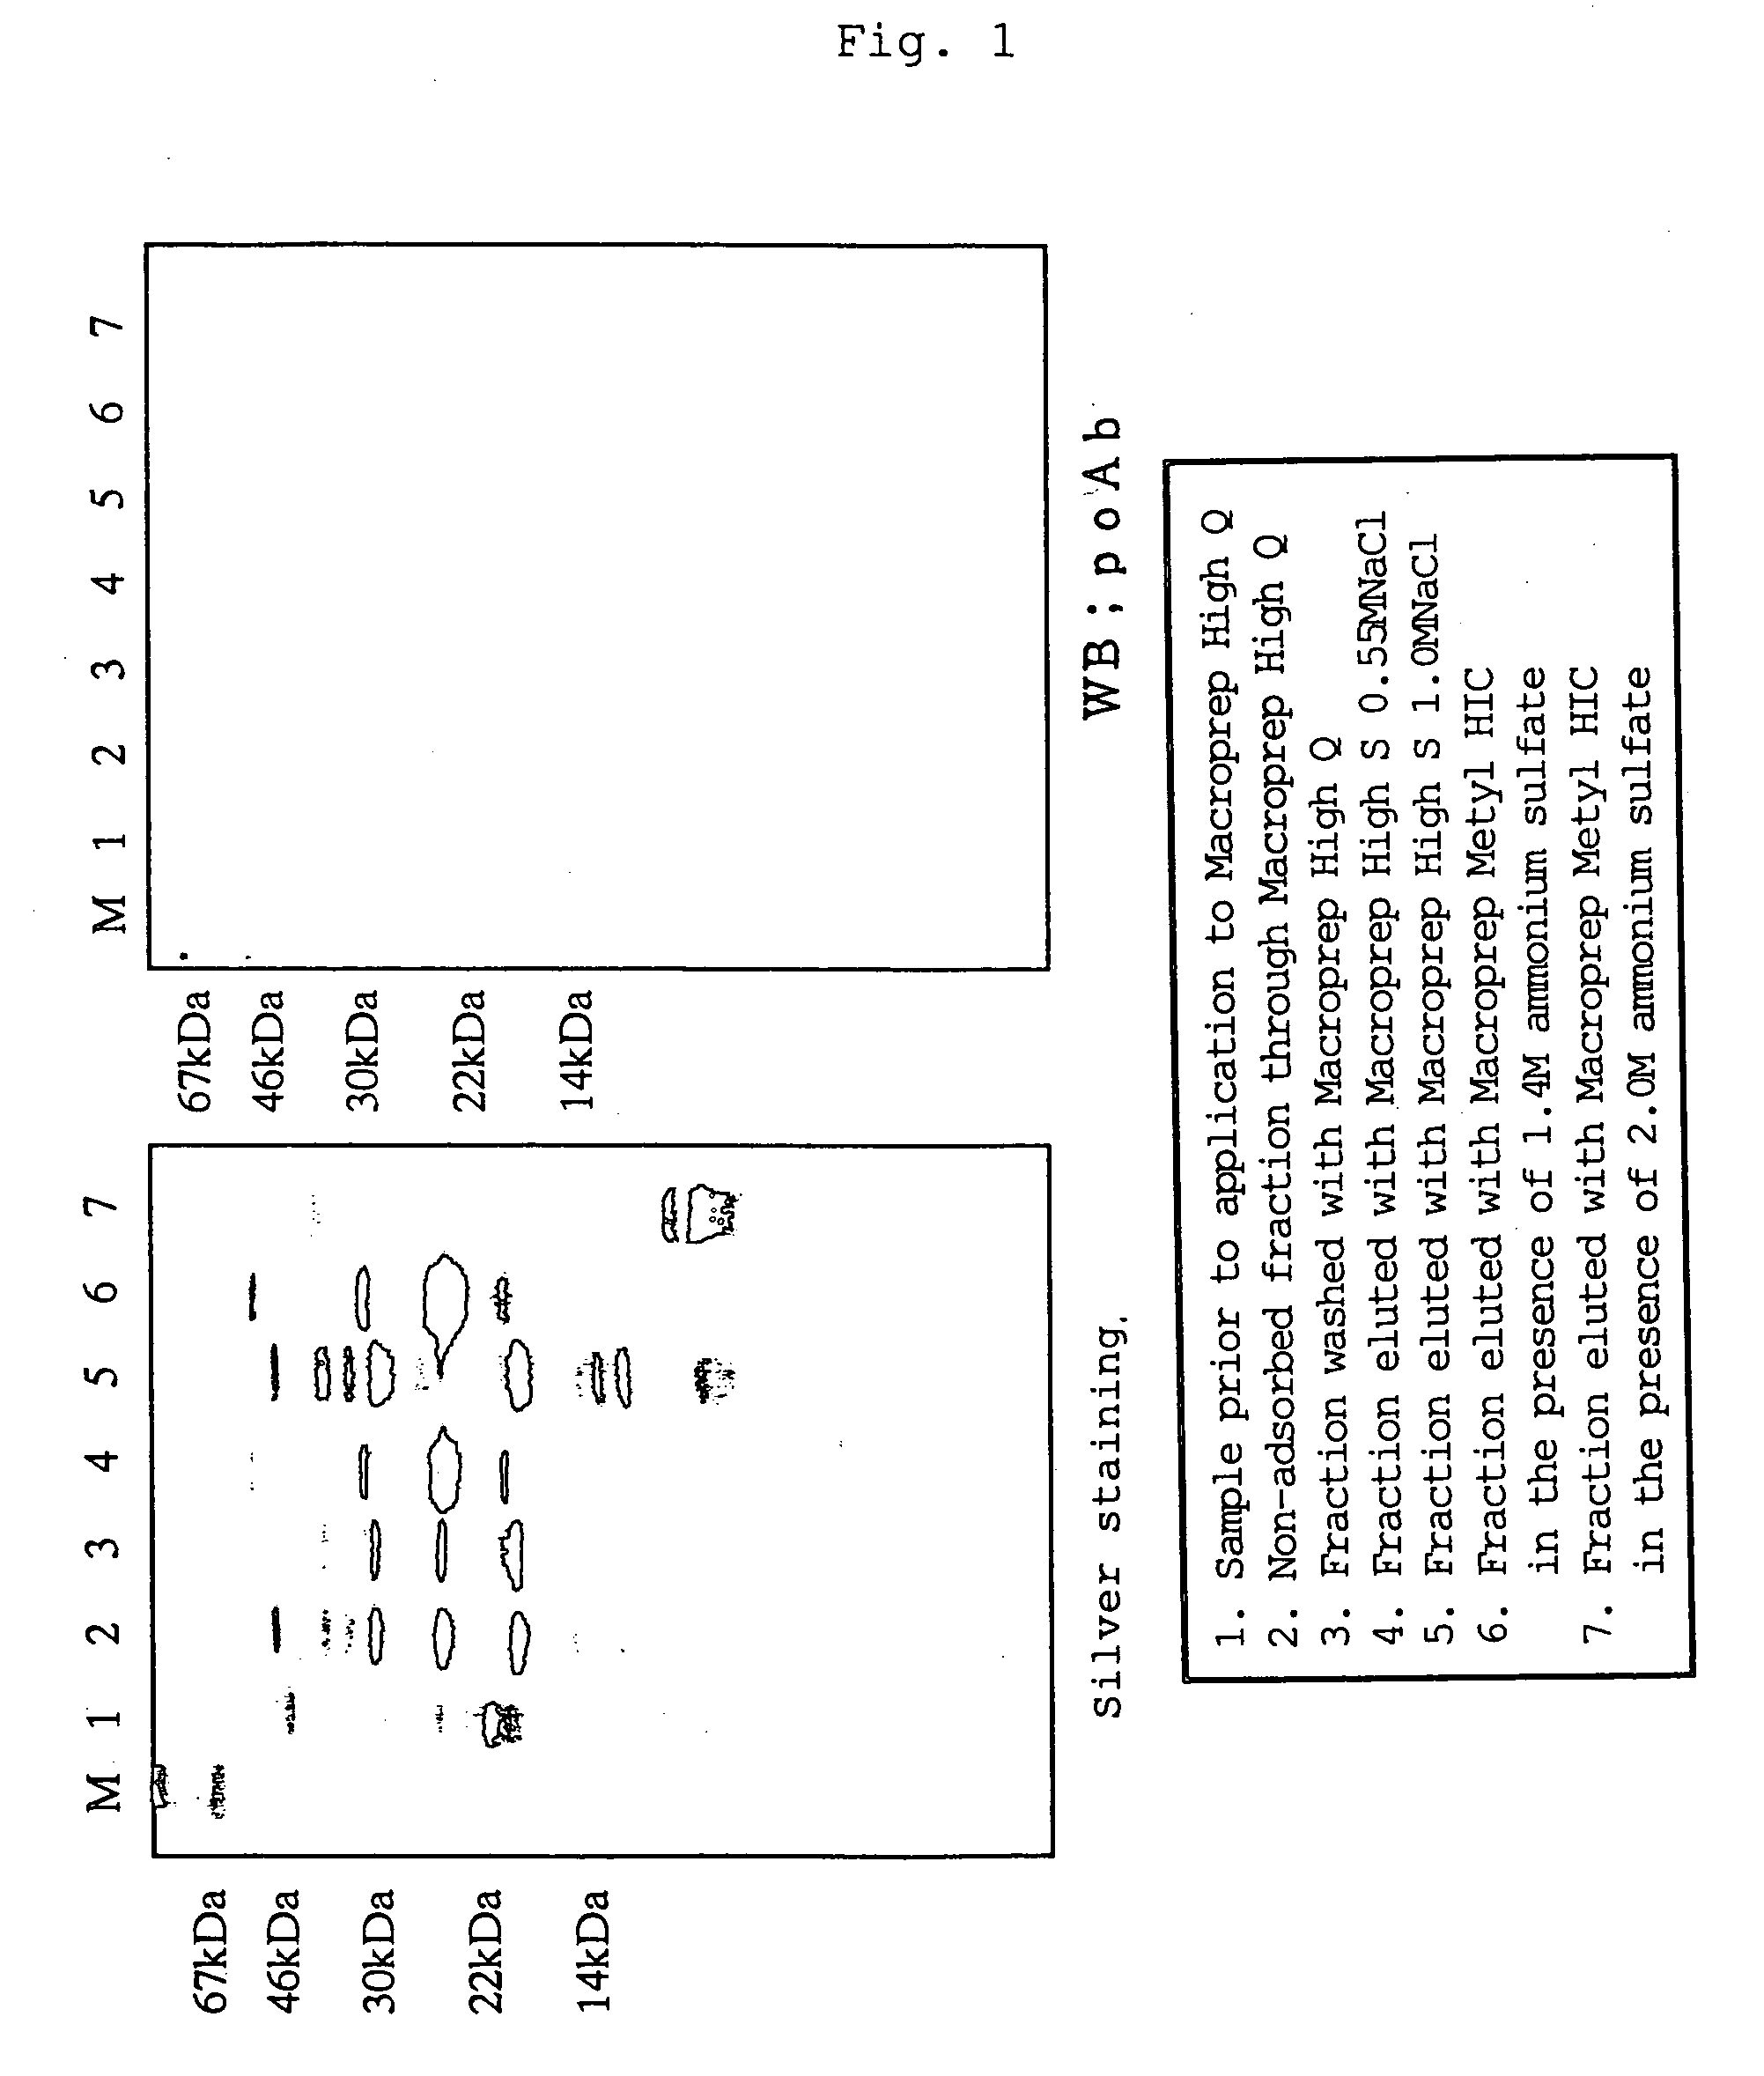 Peptide fragments having cell death-inhibitory activity